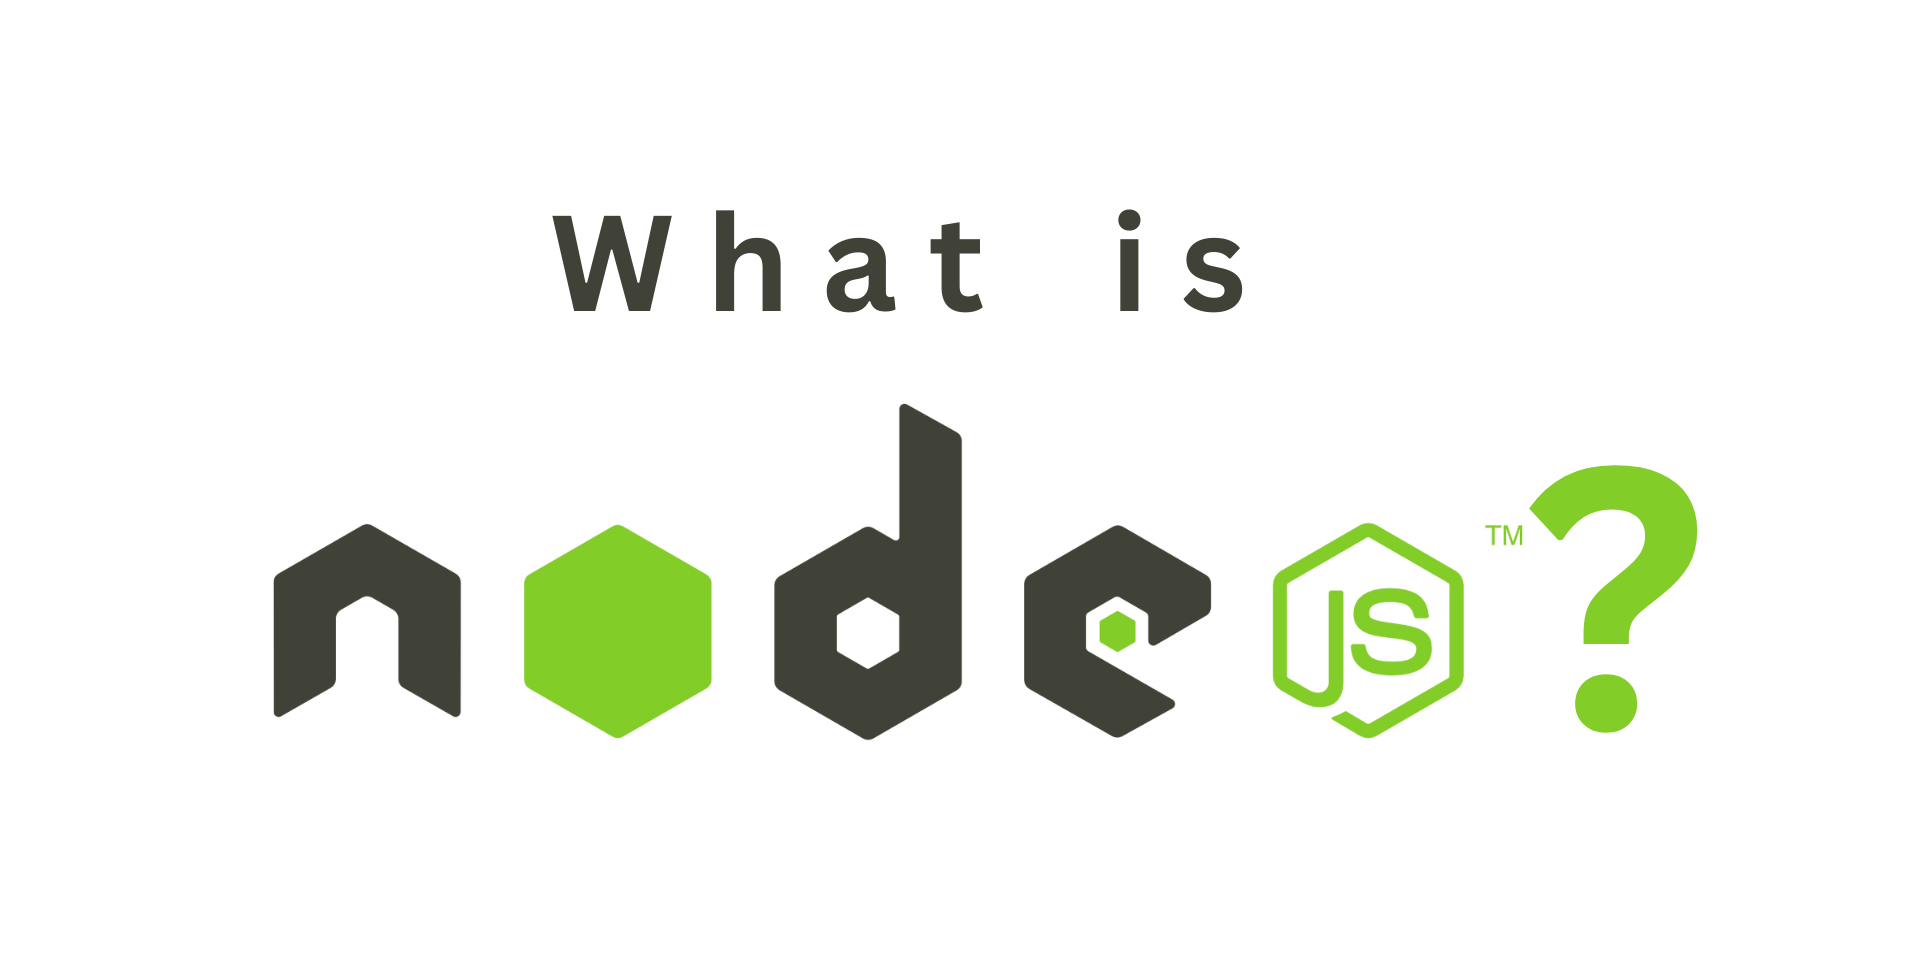 File-Based Routing in Node.js: A Step-by-Step Tutorial | by Nicolet Junior  | Stackademic